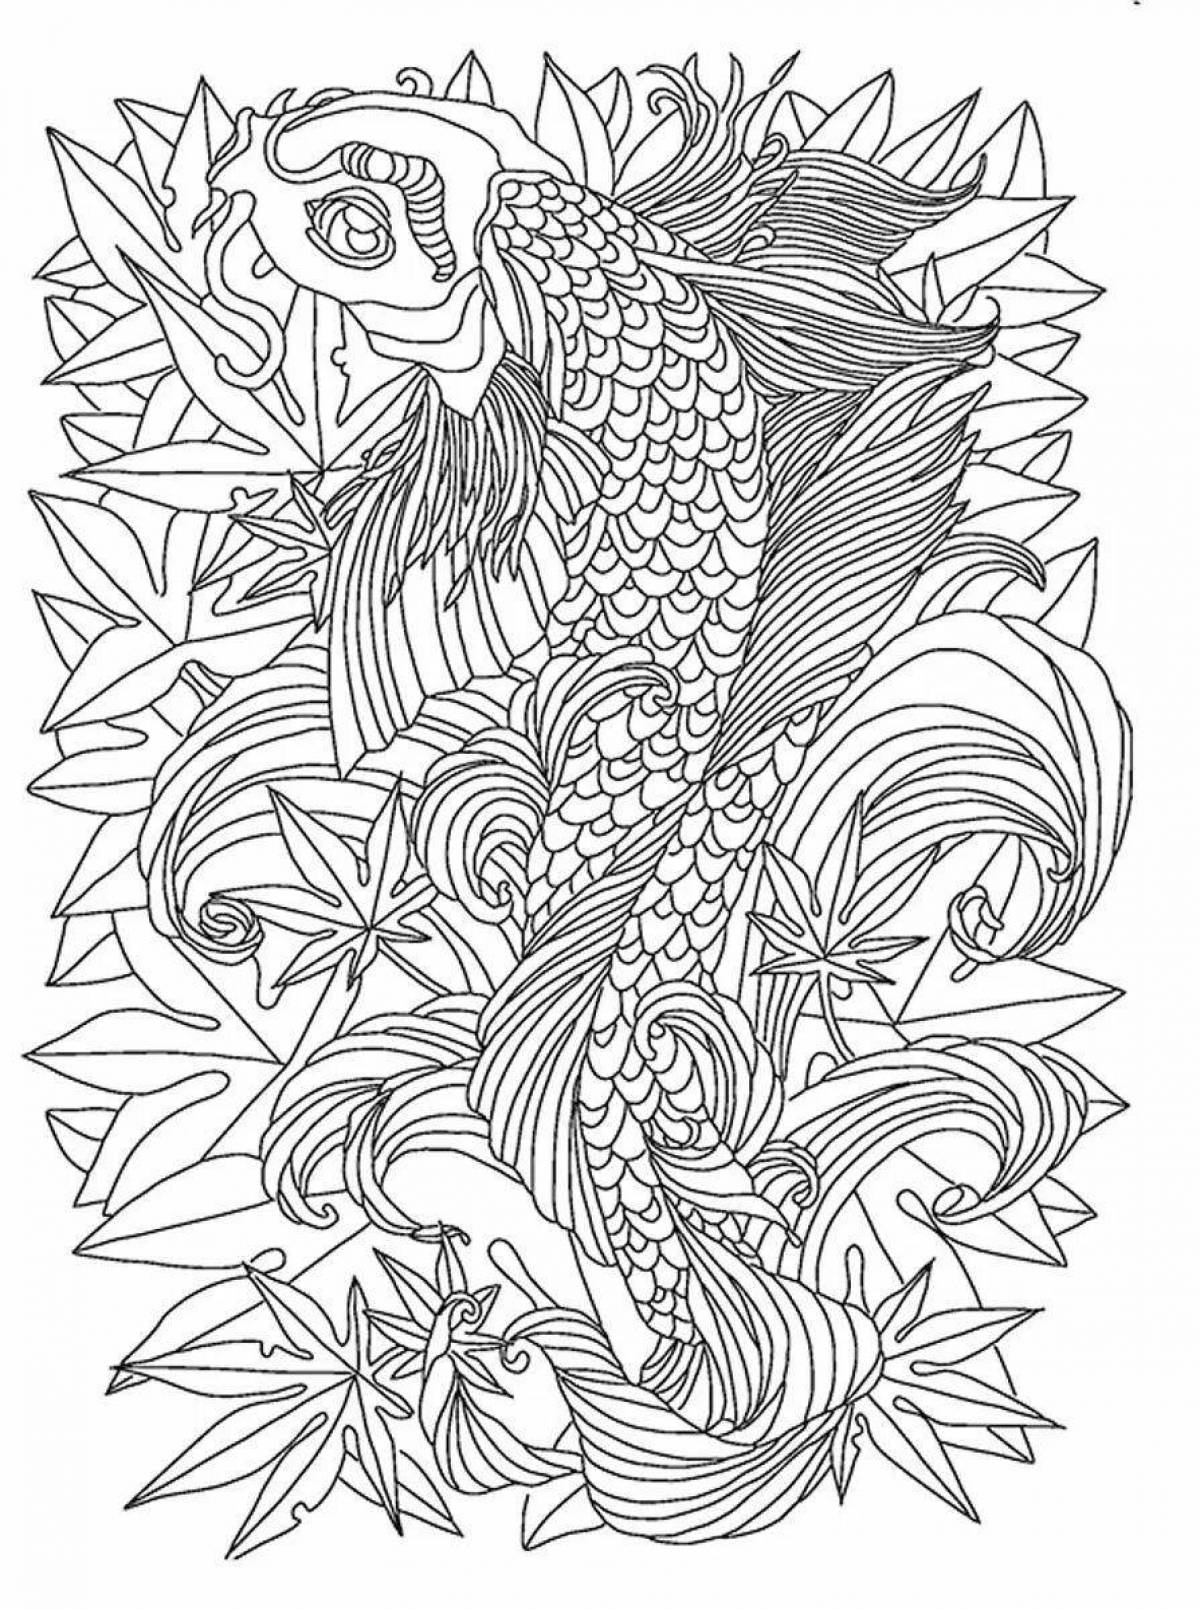 Coloring page with Chinese motifs